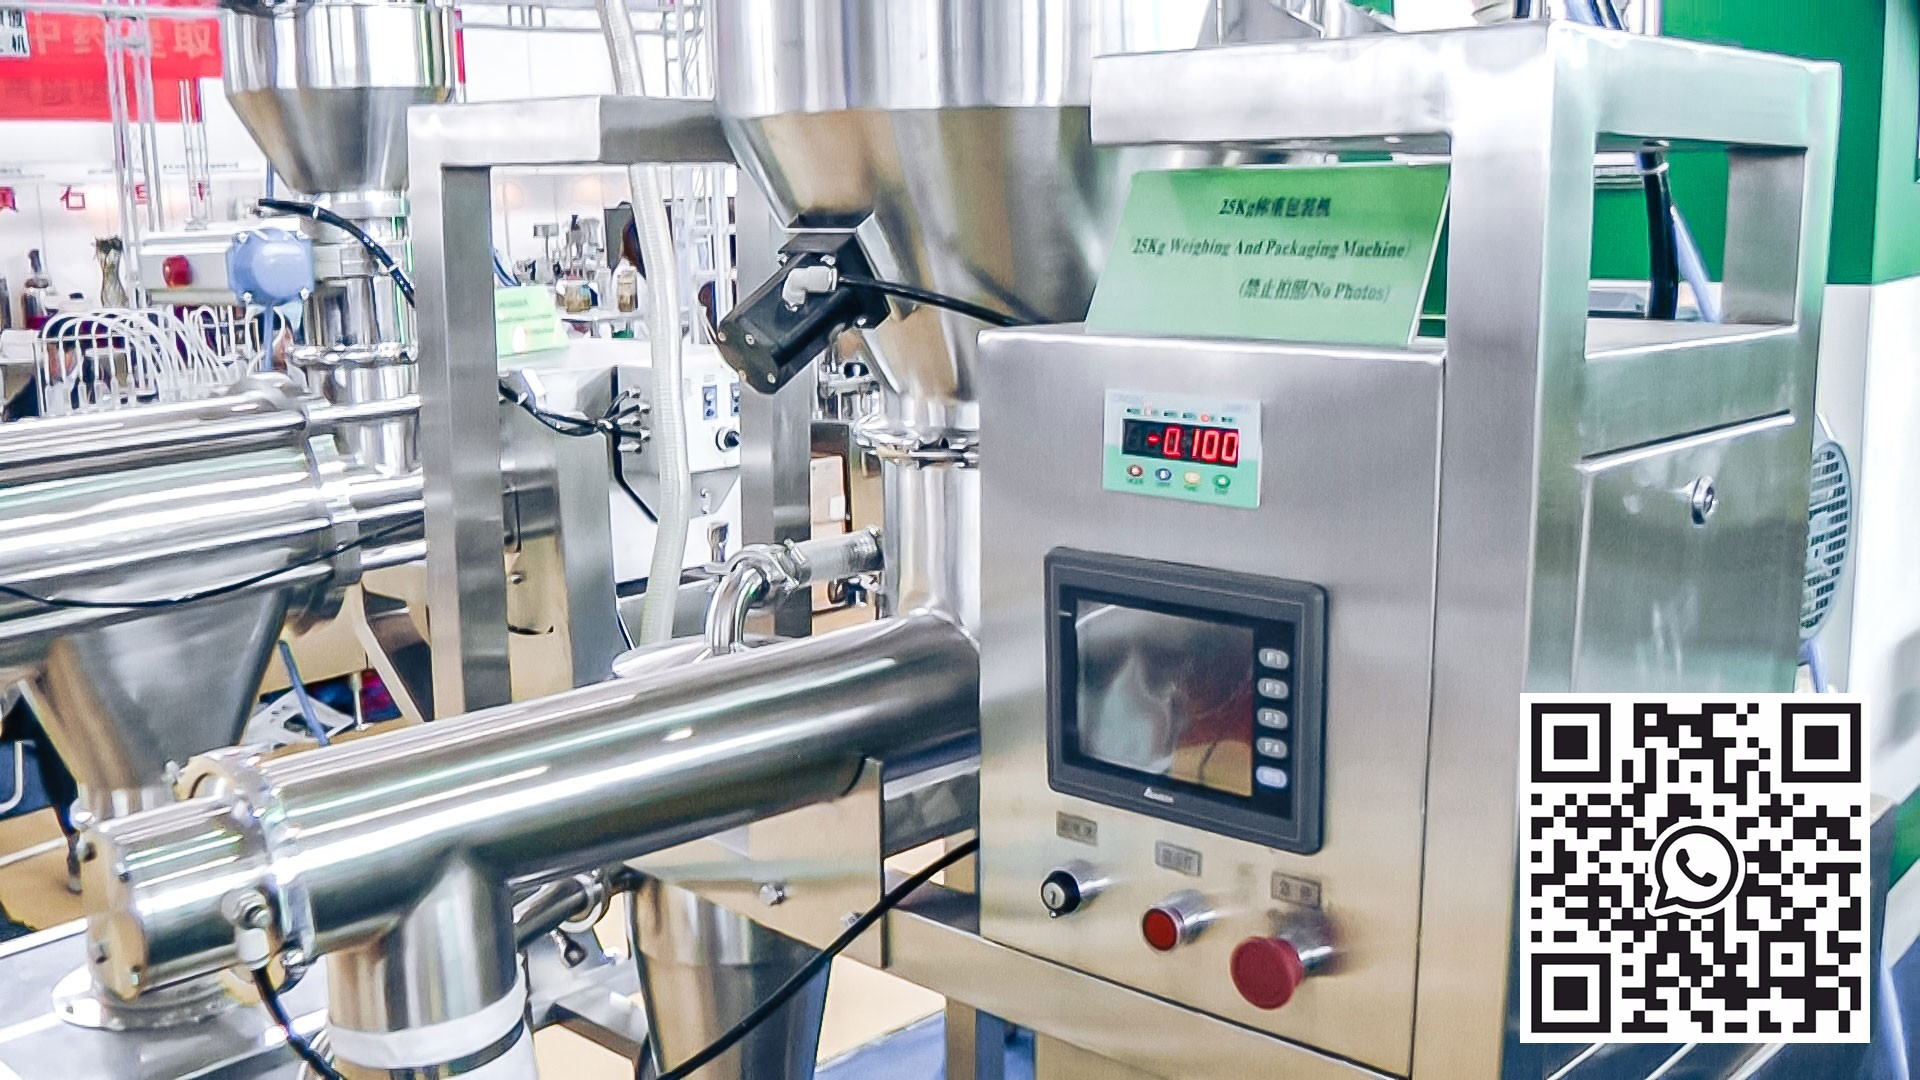 Automatic equipment for preparation and mixing of powders in pharmaceutical production